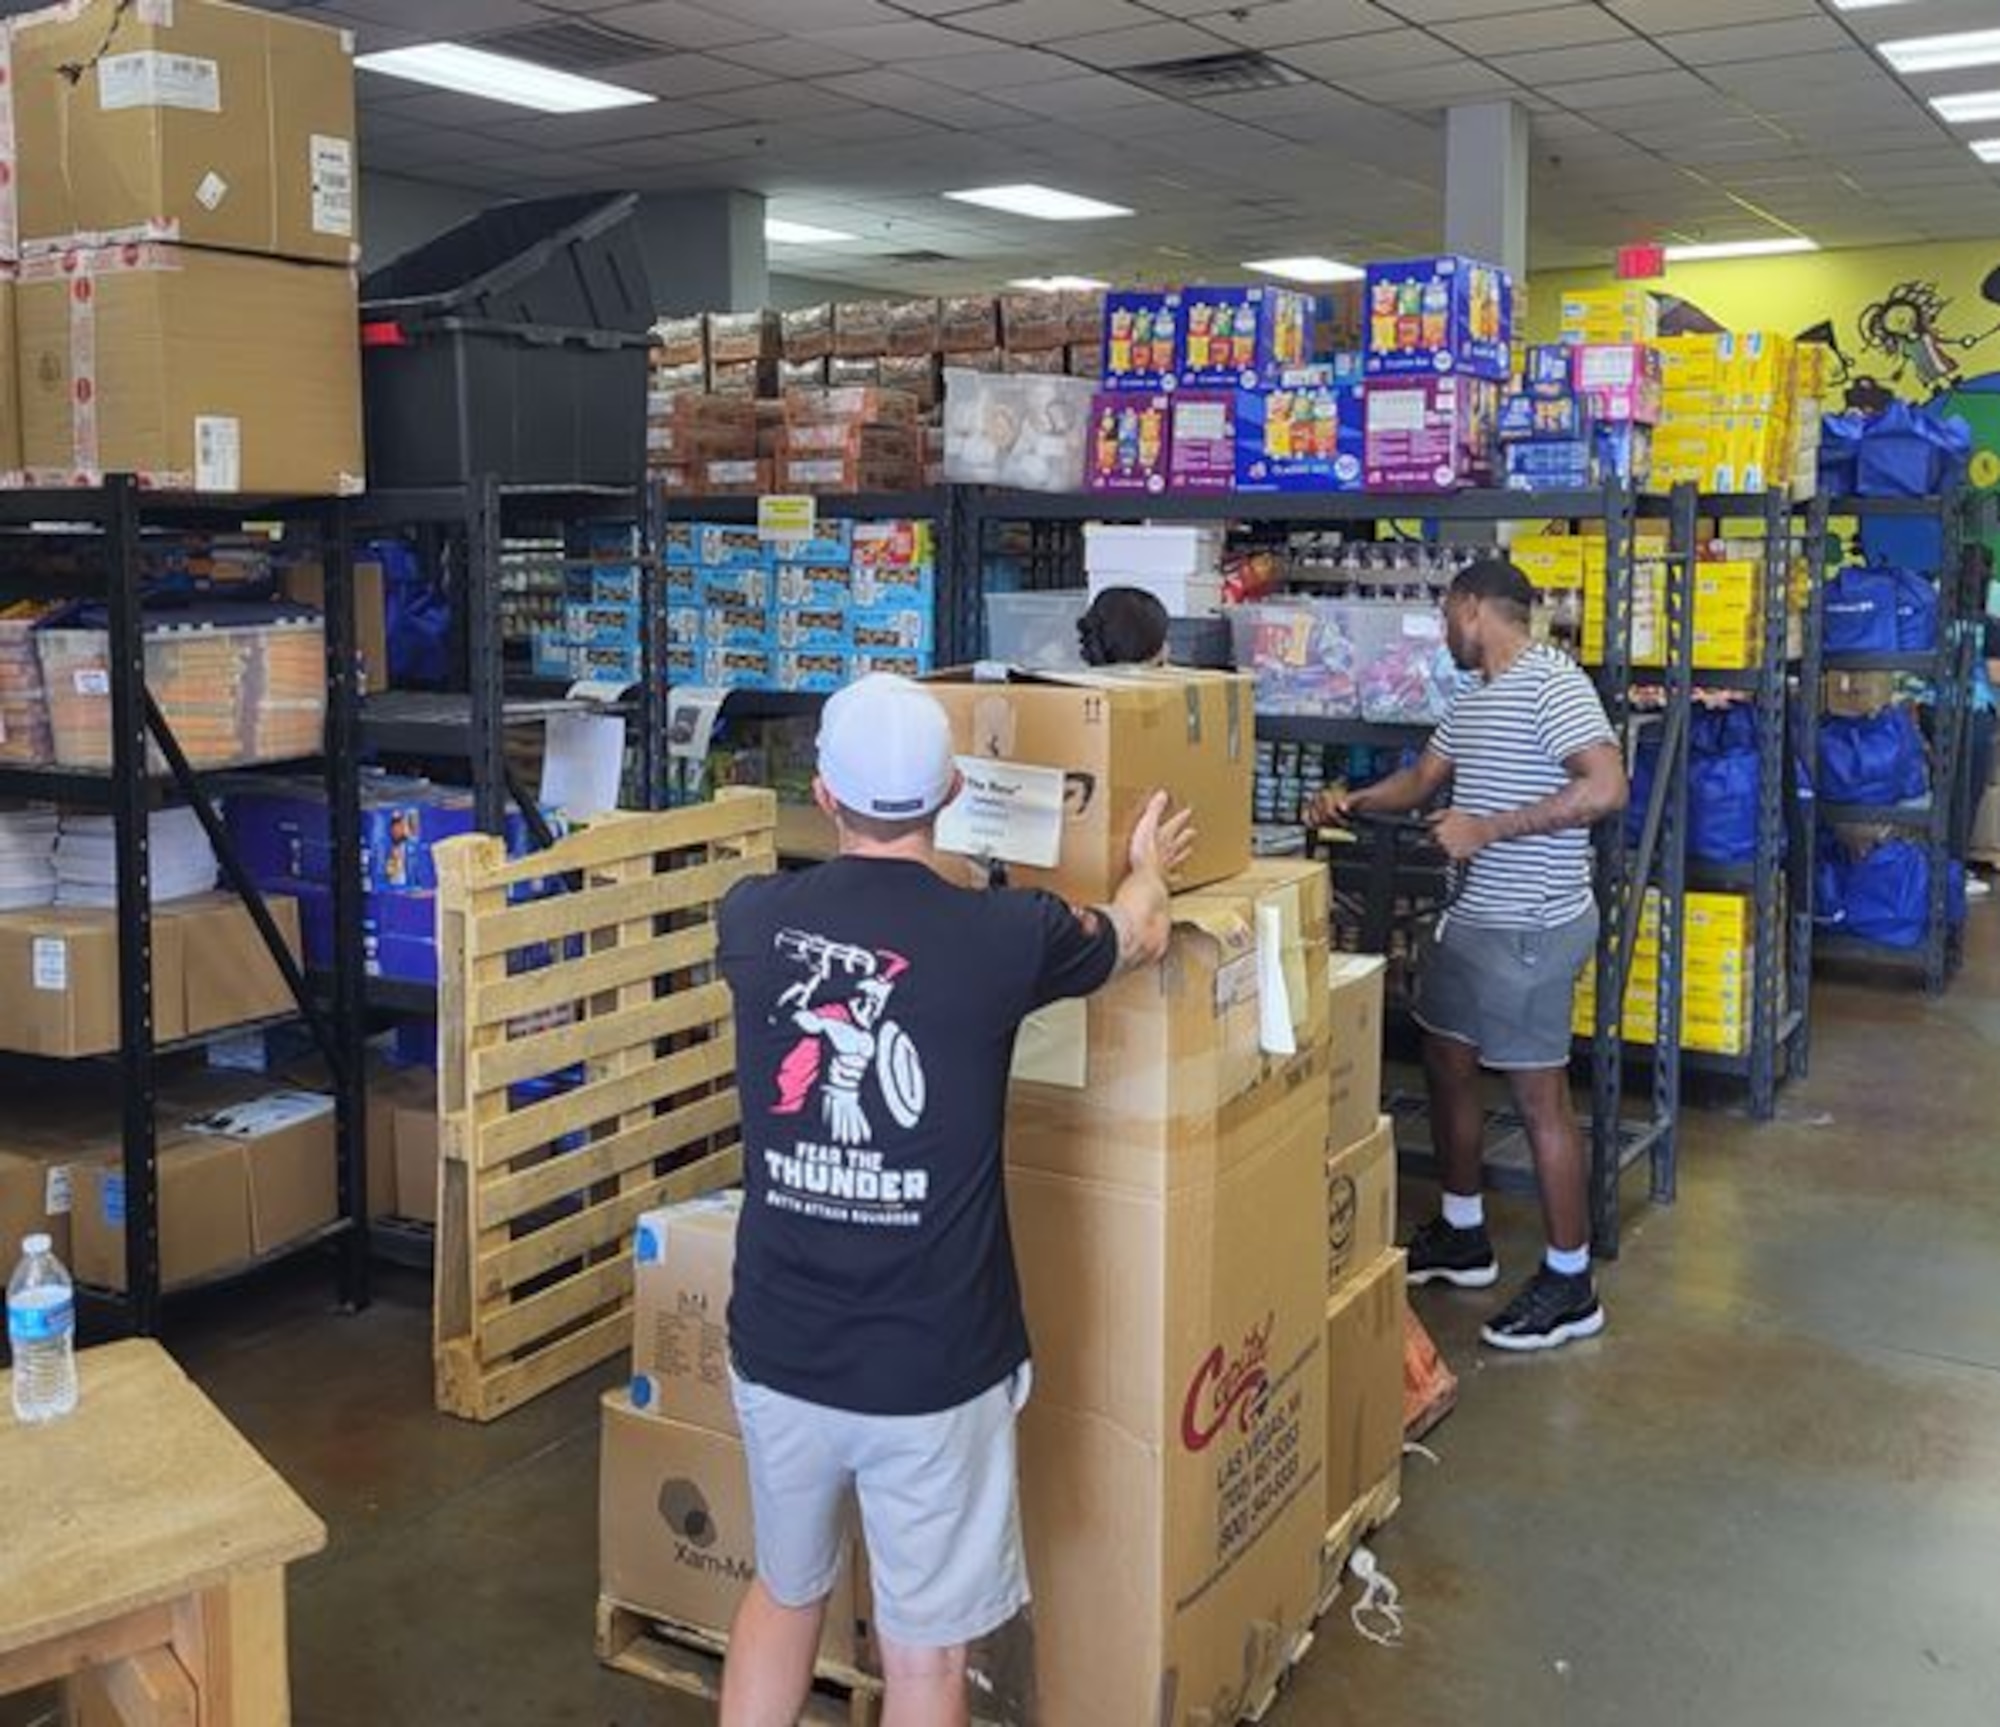 Airmen are moving donation boxes in a large room.